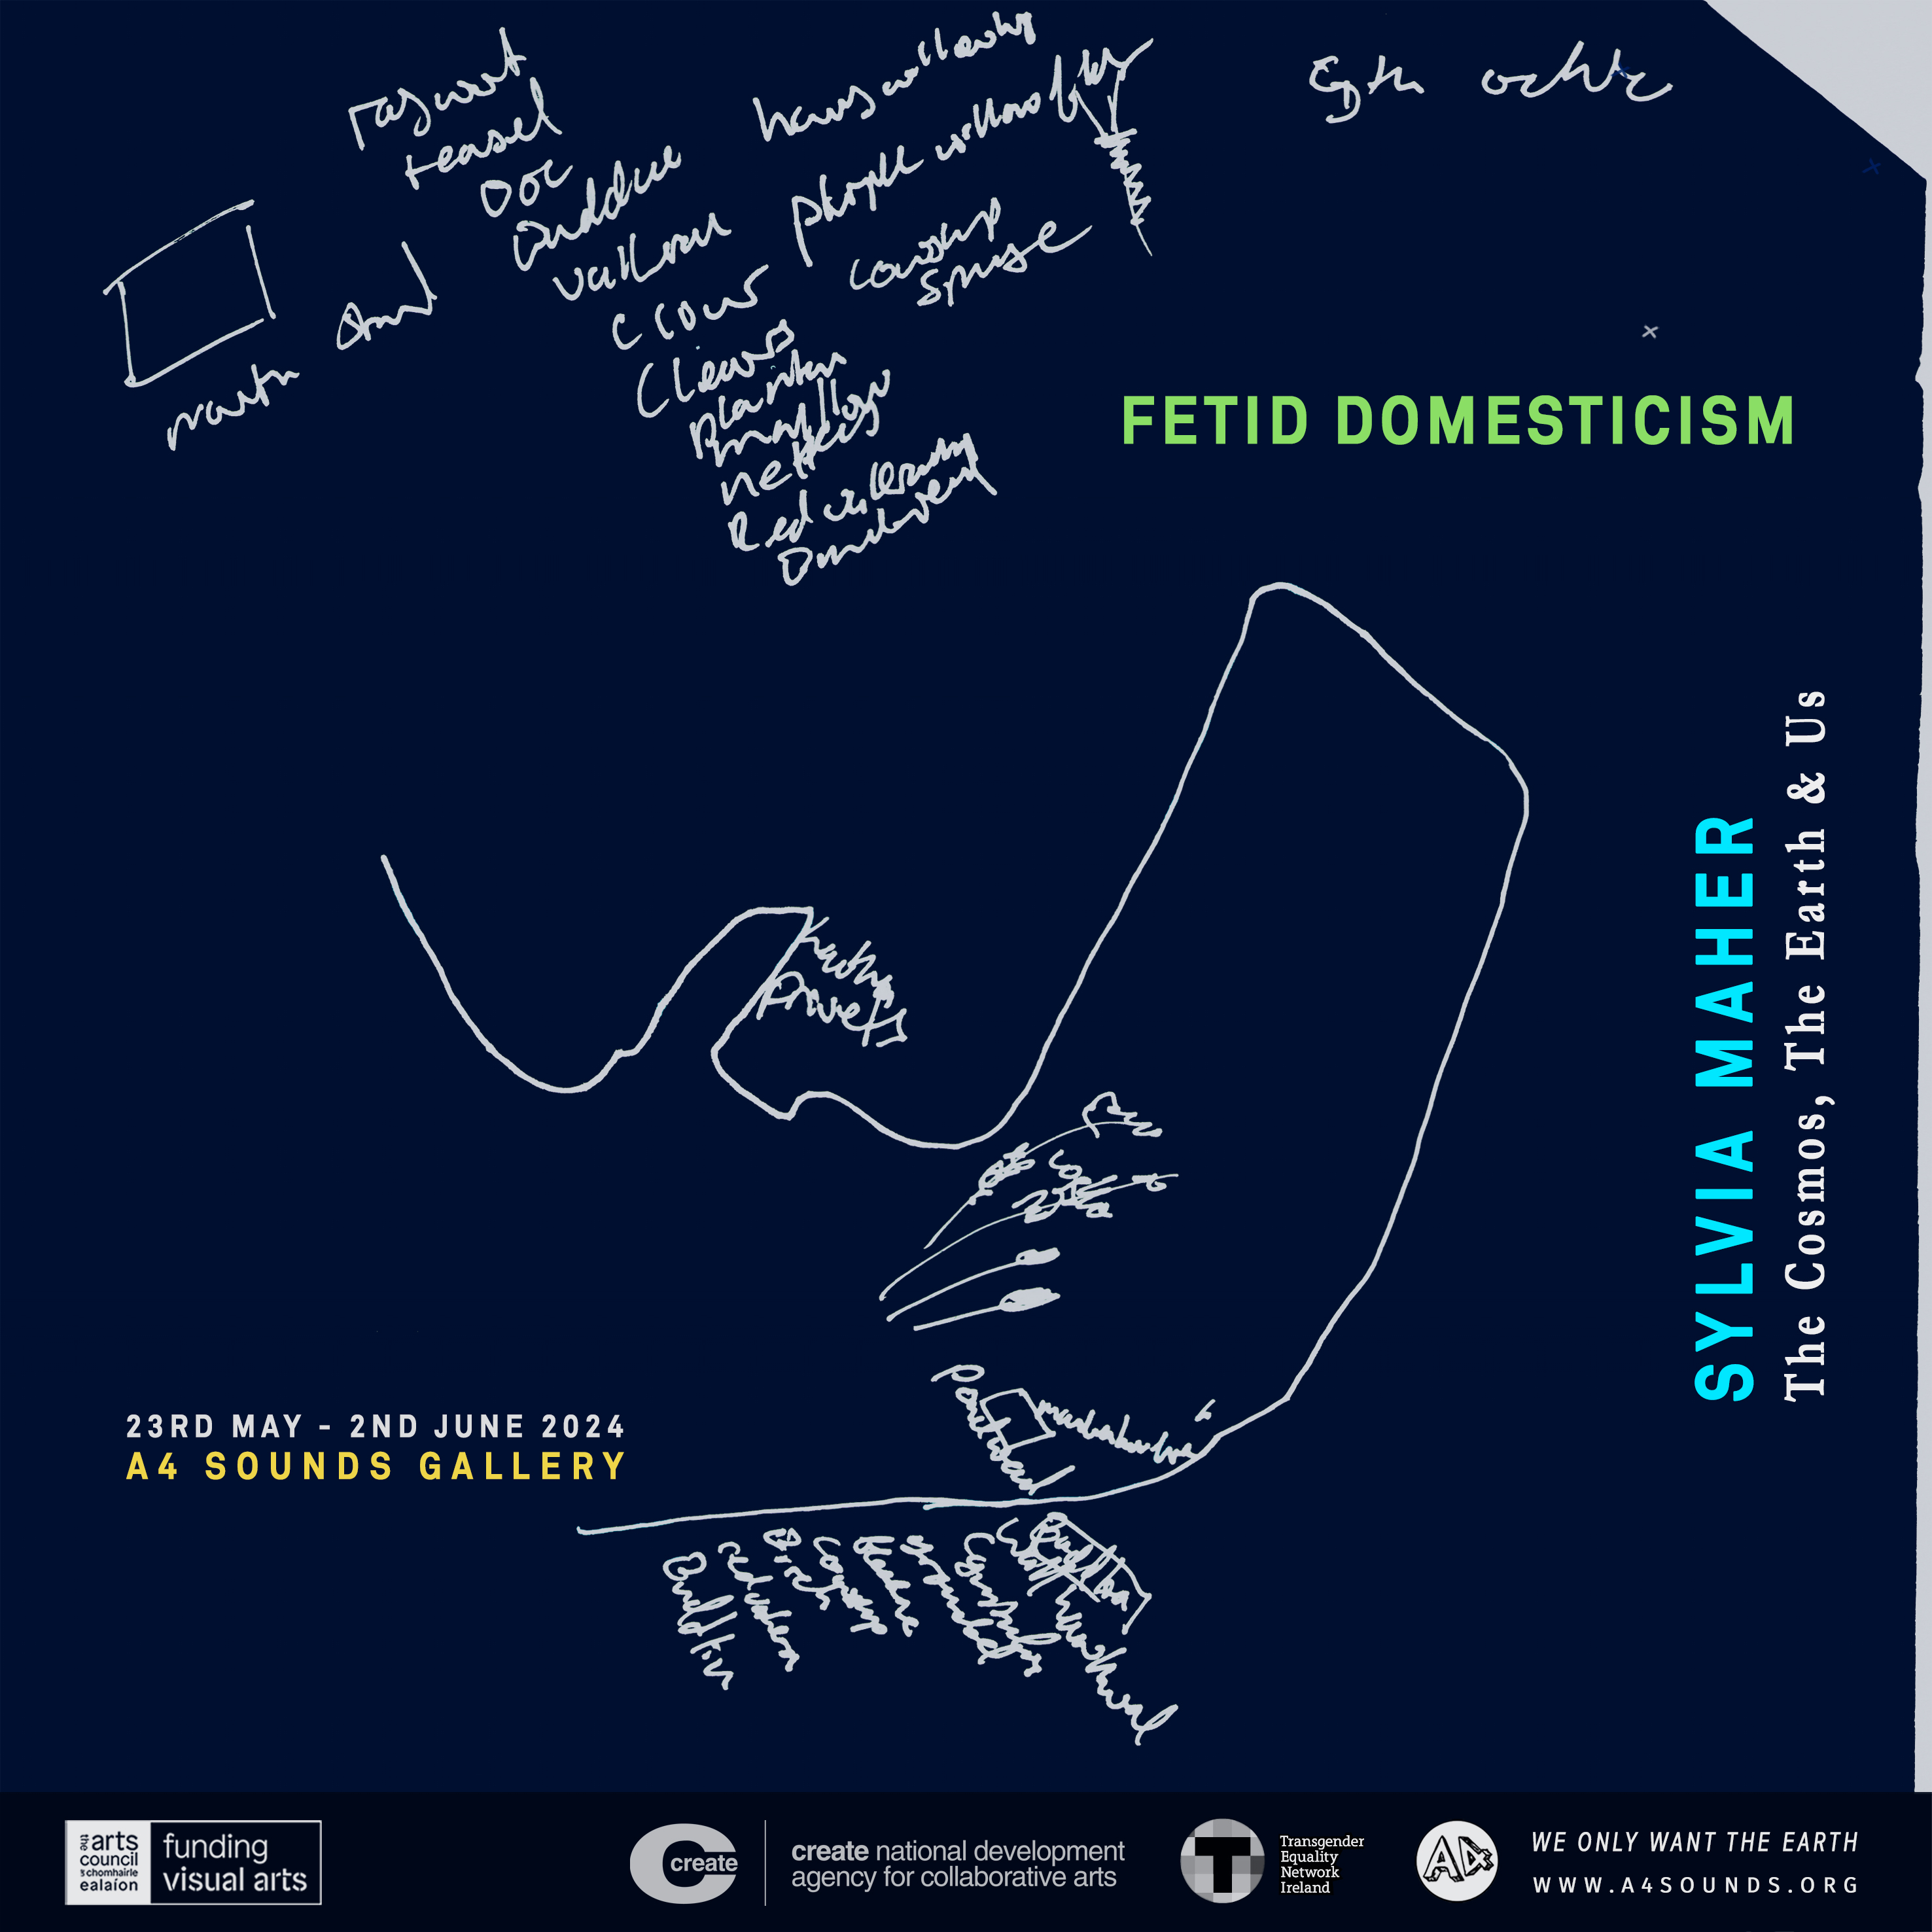 Exhibition poster for the Fetid Domesticism by Sylvia Maher at A4 Sounds. The image is a dark navy with white lines on top and some graphic text. The white lines are snippets of the artists drawings from the exhibition where she has listed the names of plants observed on walks around Dublin. There is also a hand drawn line that maps the route of the walk taken. Graphic text in green and blue colours from maps show include the title of the exhibition, artist name, and dates. The text reads: Fetid Domesticism. Sylvia Maher, The Cosmos The Earth and Us, 23rdMay - 2nd June. The A4 Sounds Gallery. At the bottom there is a banner that shows the logos of partners and funder.